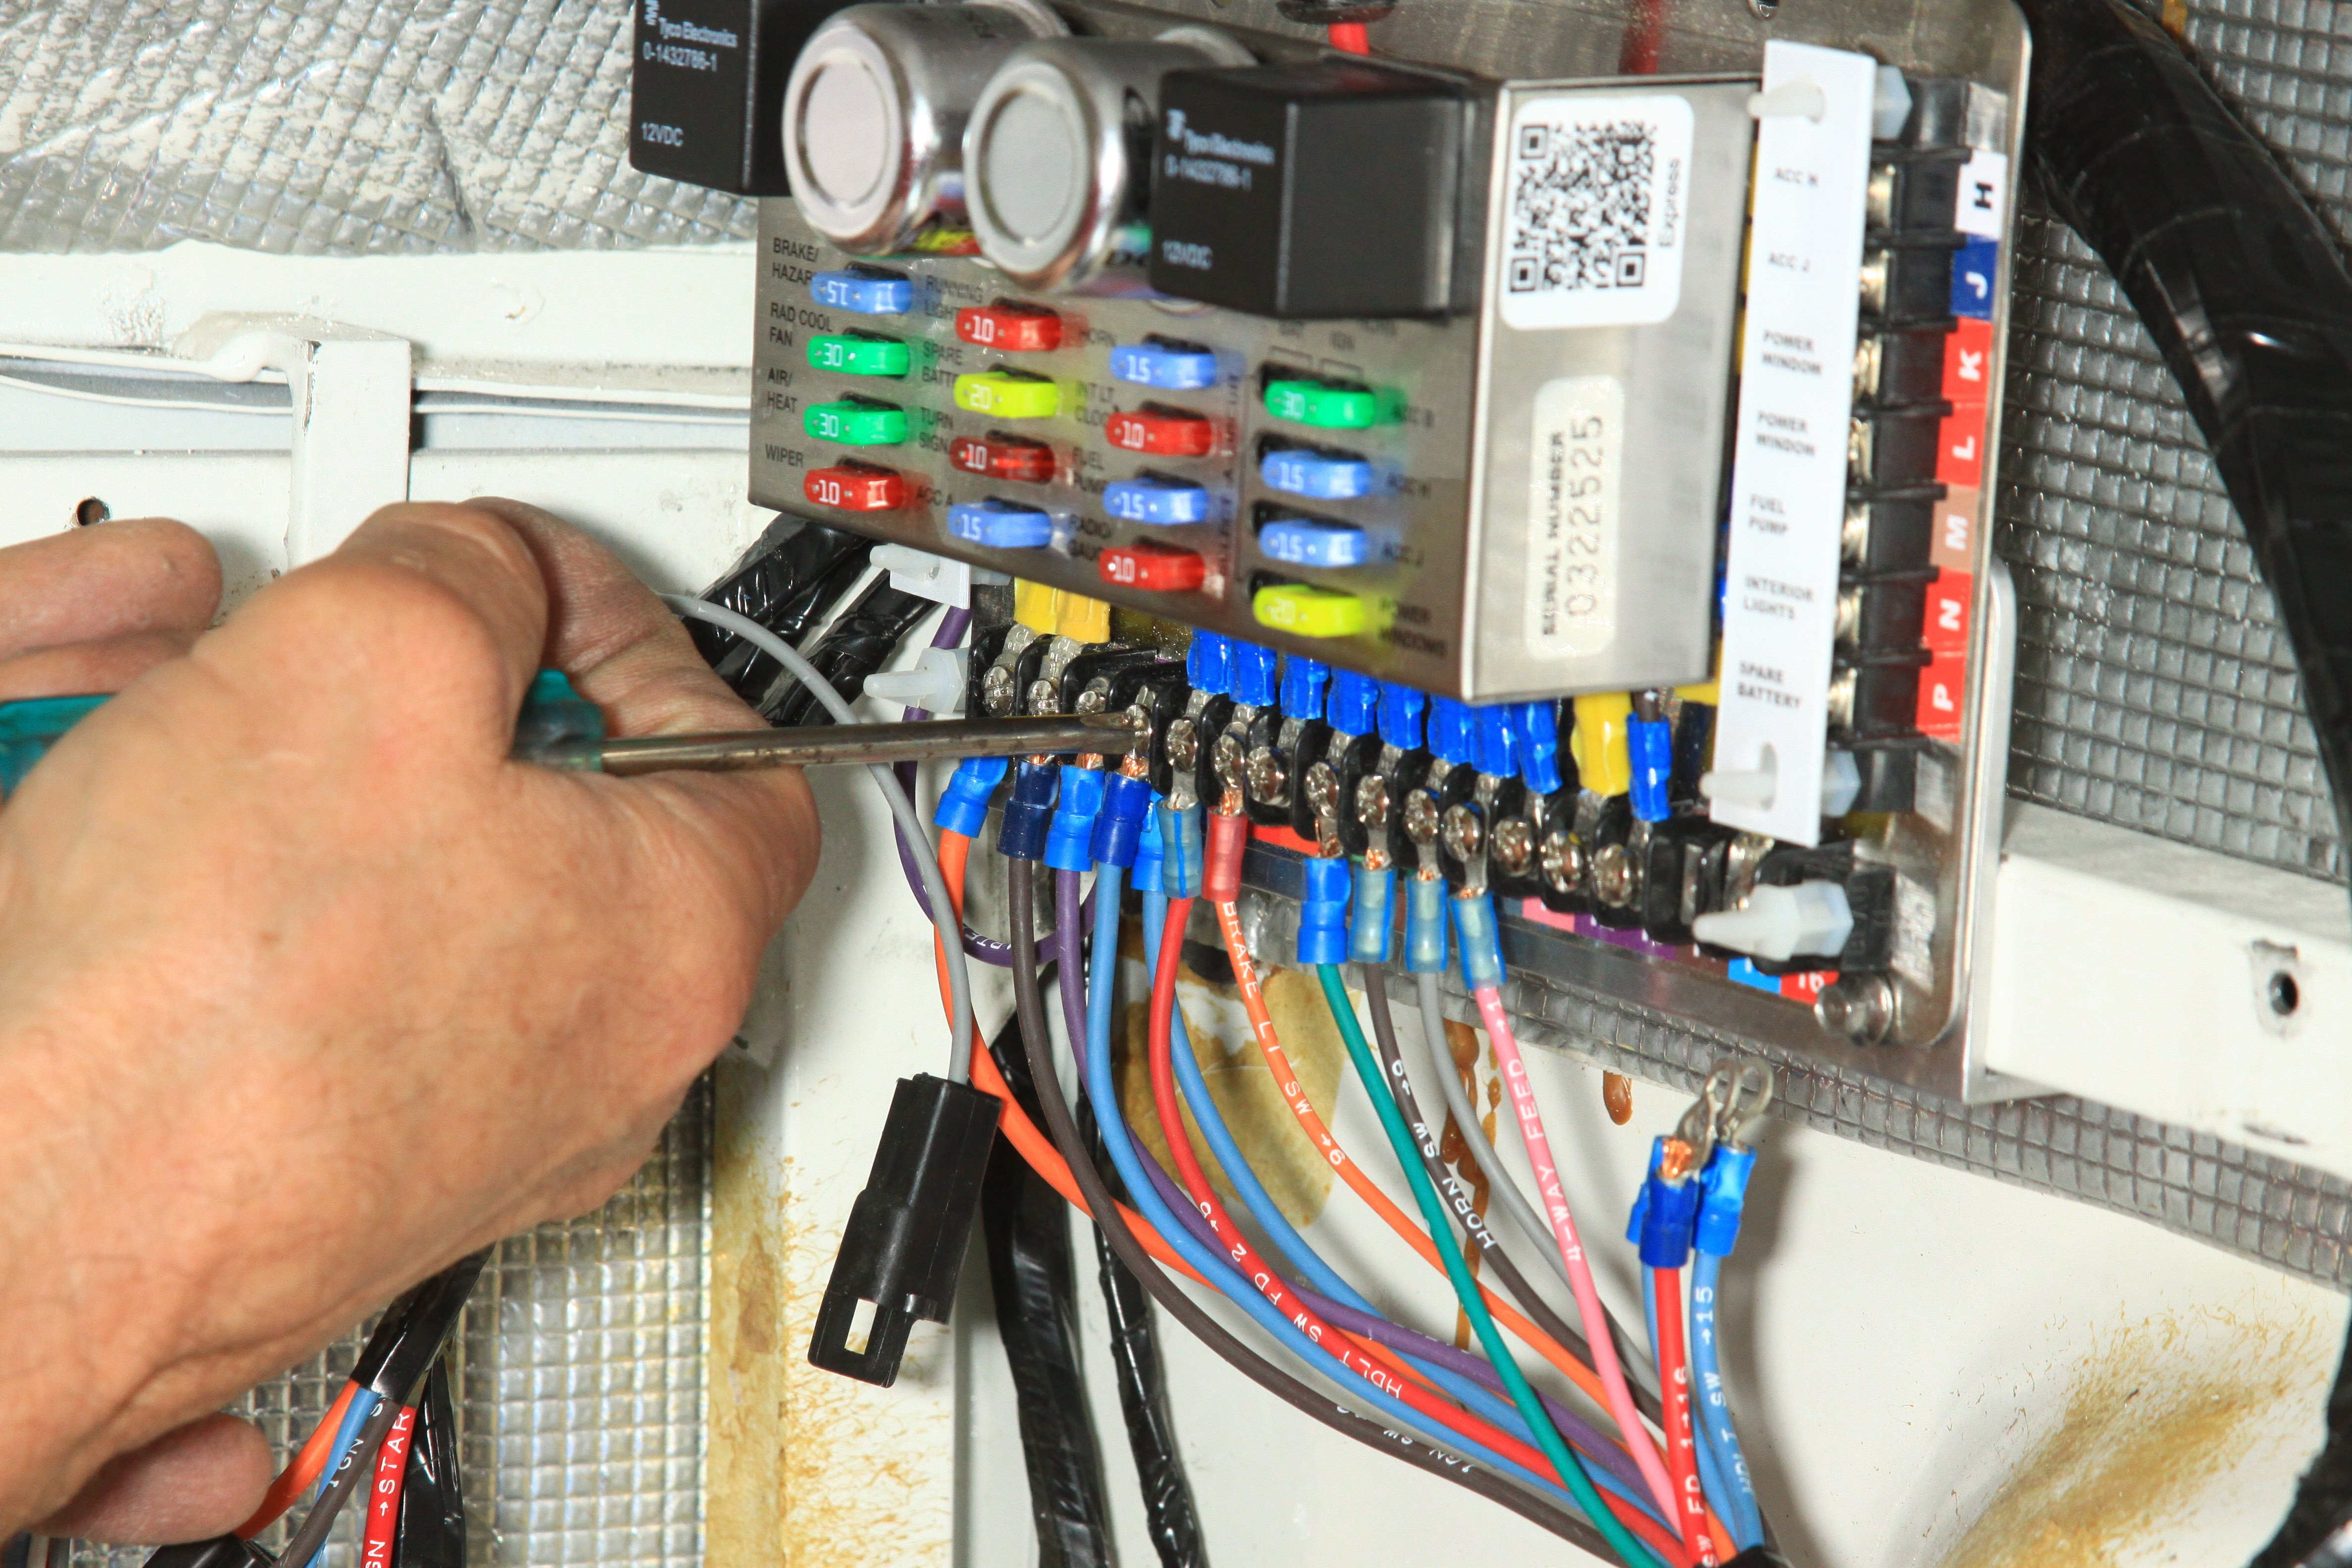 Ron Francis Wiring Takes The Guess Work, Ron Francis Wiring Harness Instructions